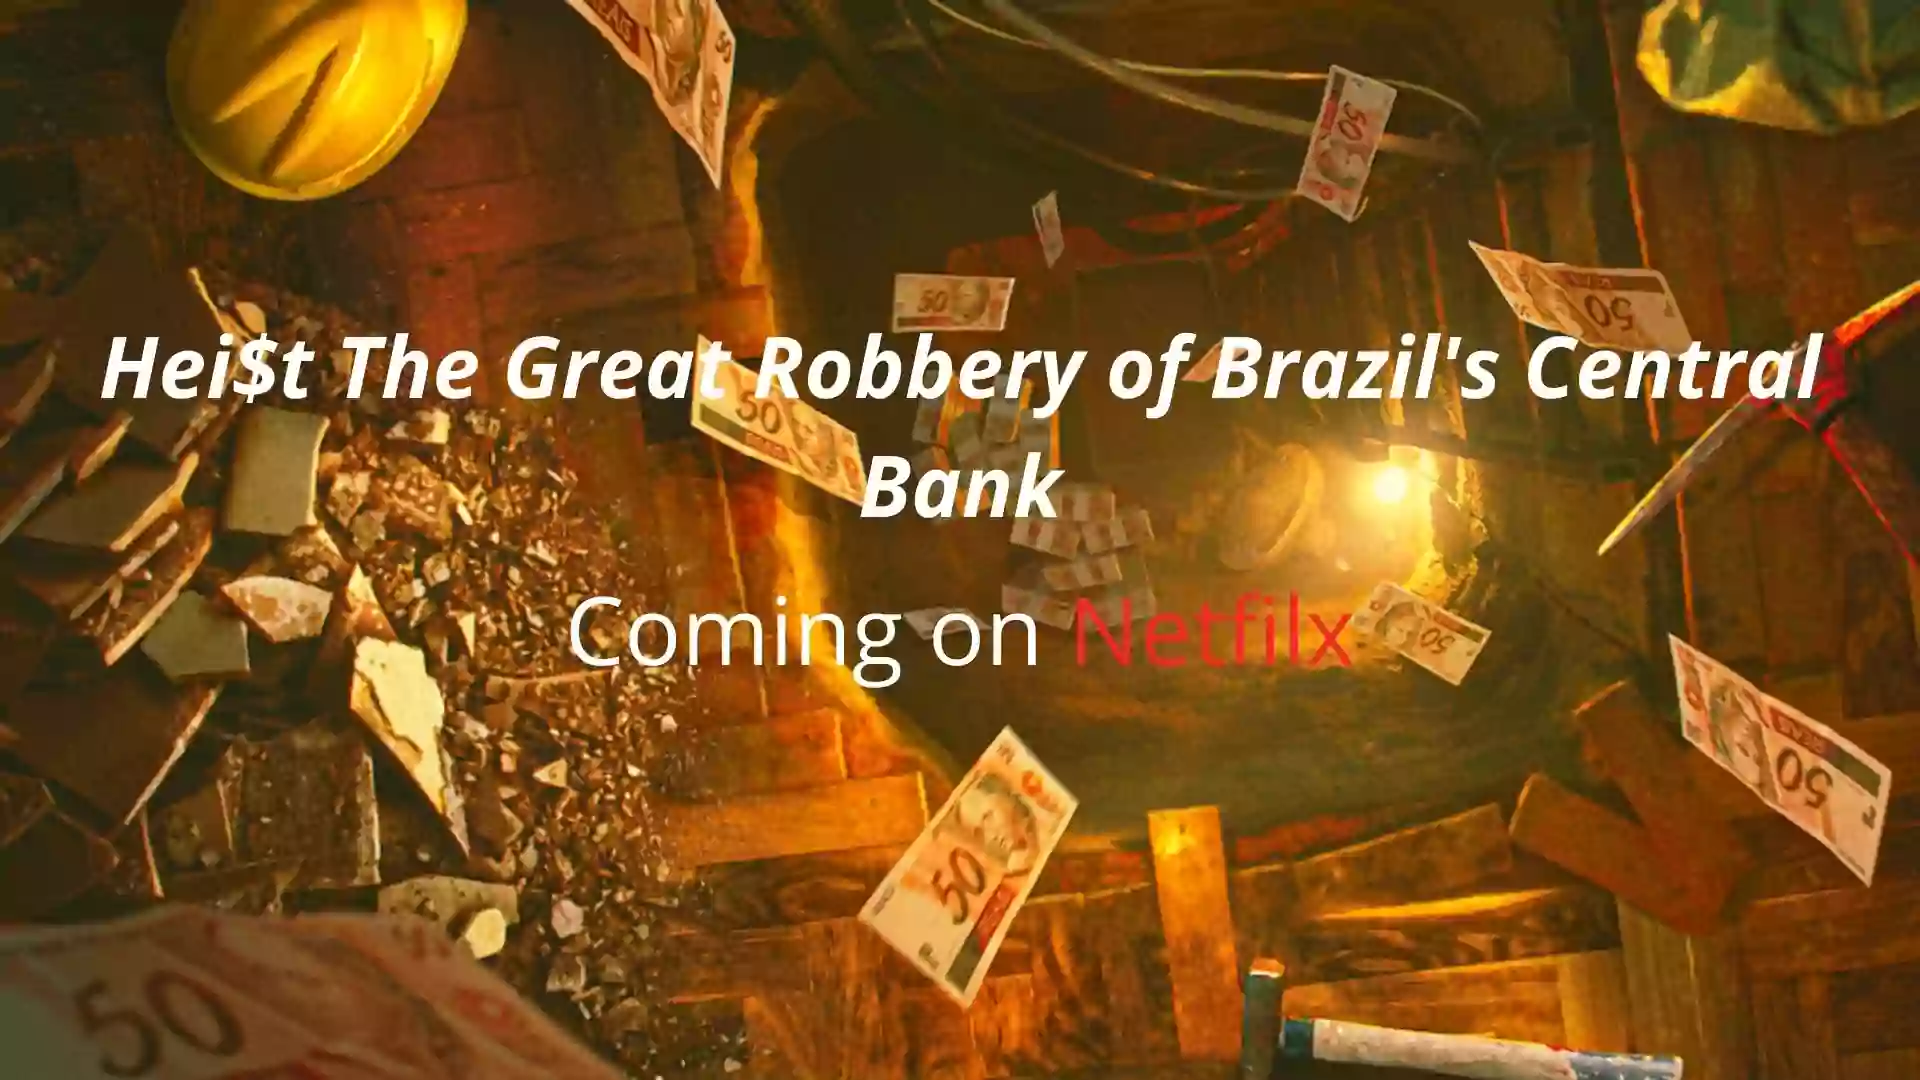 Hei$t The Great Robbery of Brazil's Central Bank Parents Guide|2022